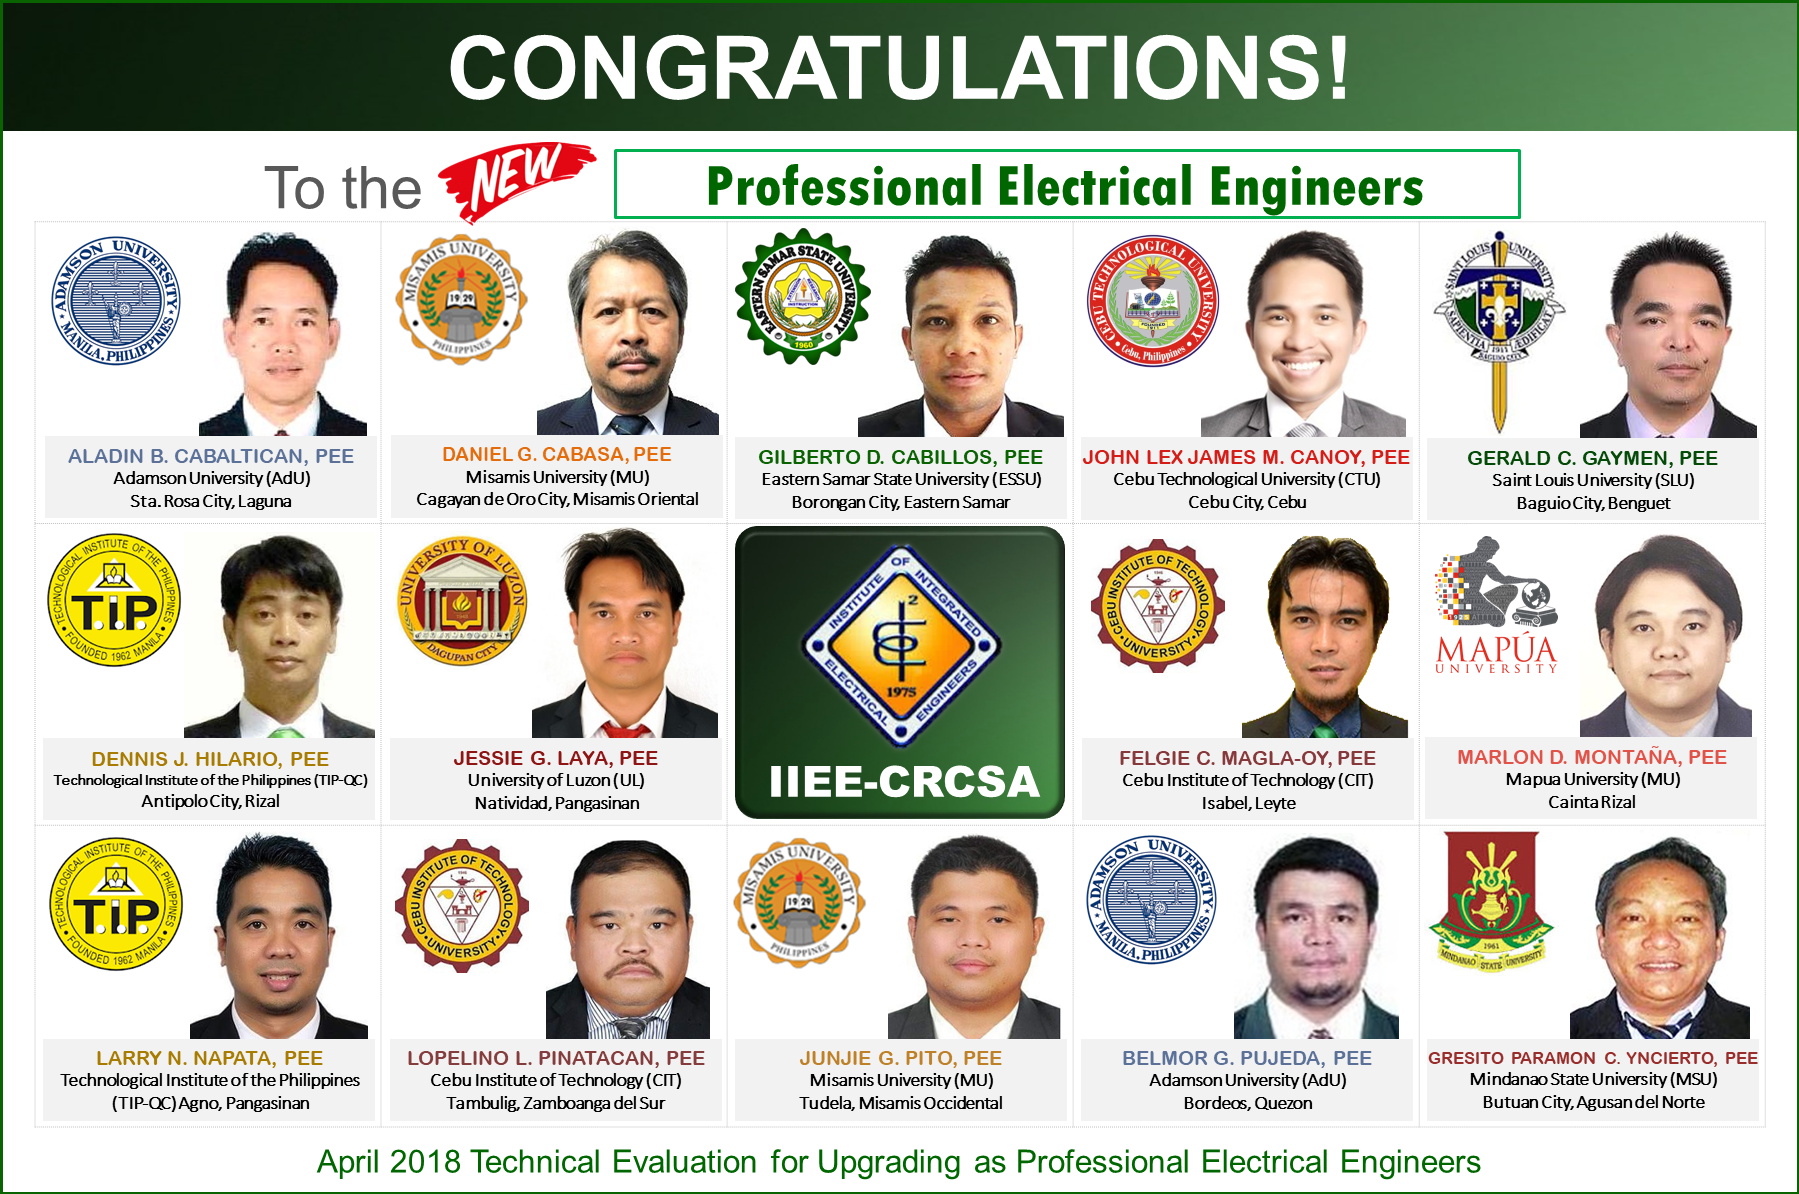 IIEE-CRCSA Batch 2 and 3 Professional Electrical Engineers